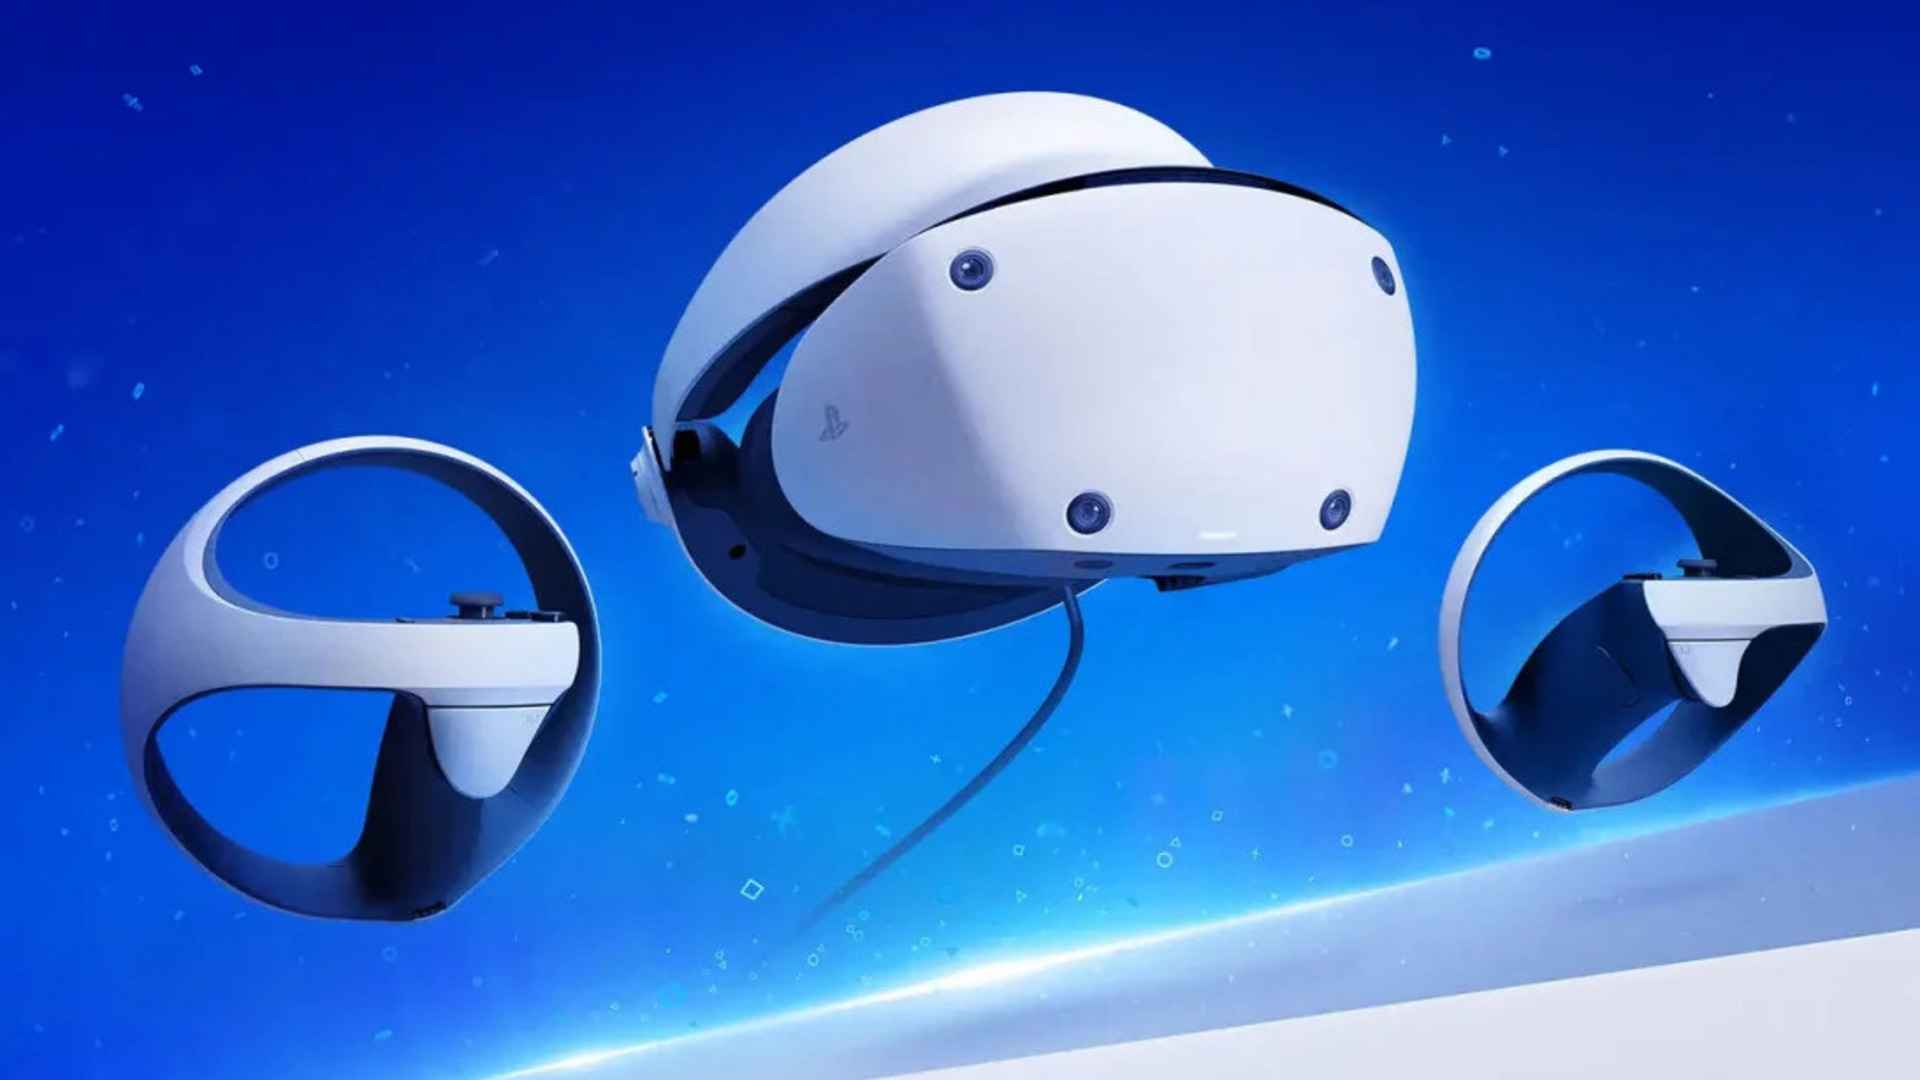 Sony launches standalone MR headset with 4K OLED displays and unique controllers